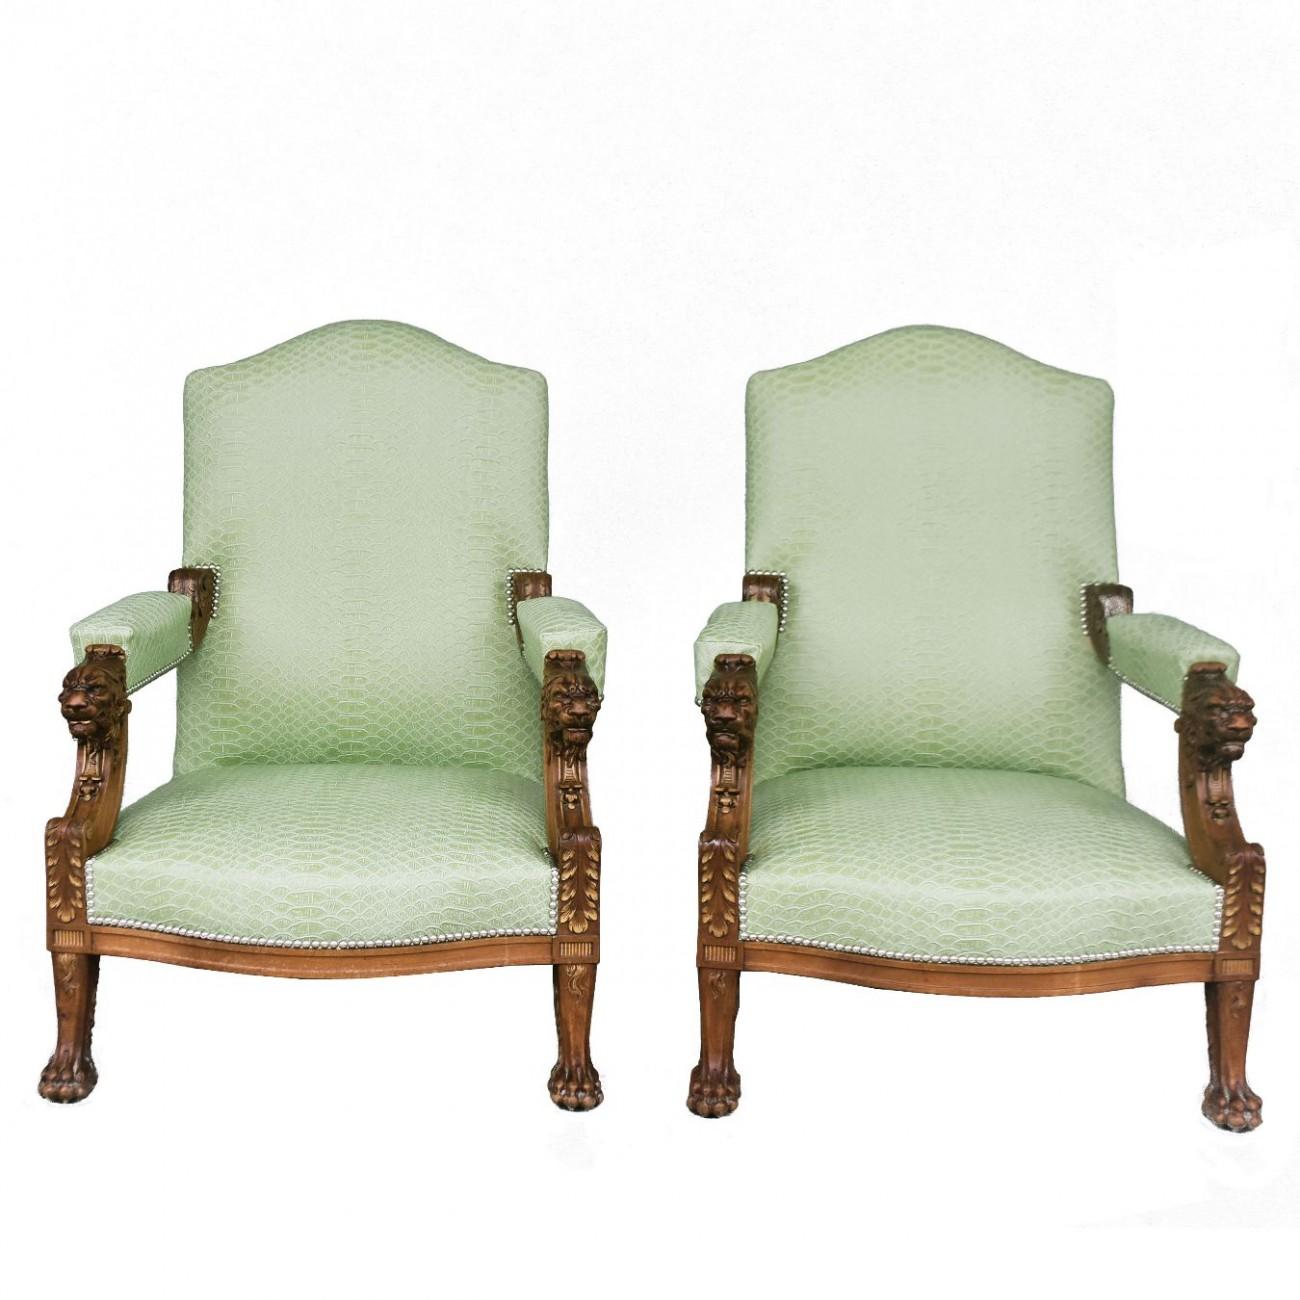 Late 19th Century Pair of Walnut Armchairs with Lion and Claw Feet For Sale